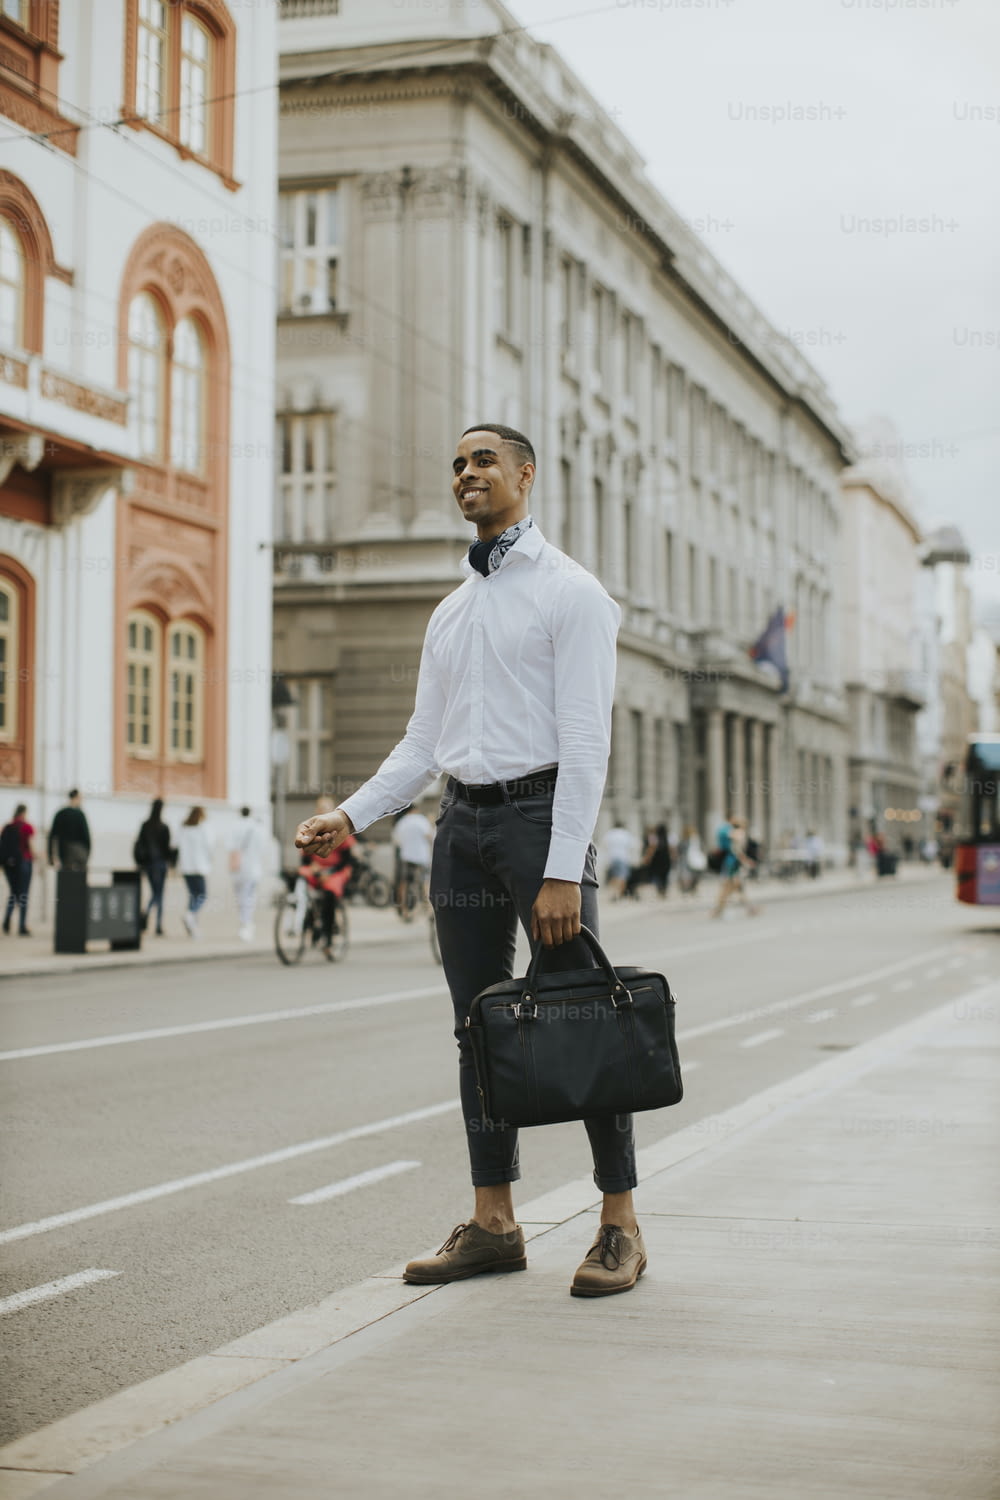 Handsome young African American businessman waitng a taxi on a street